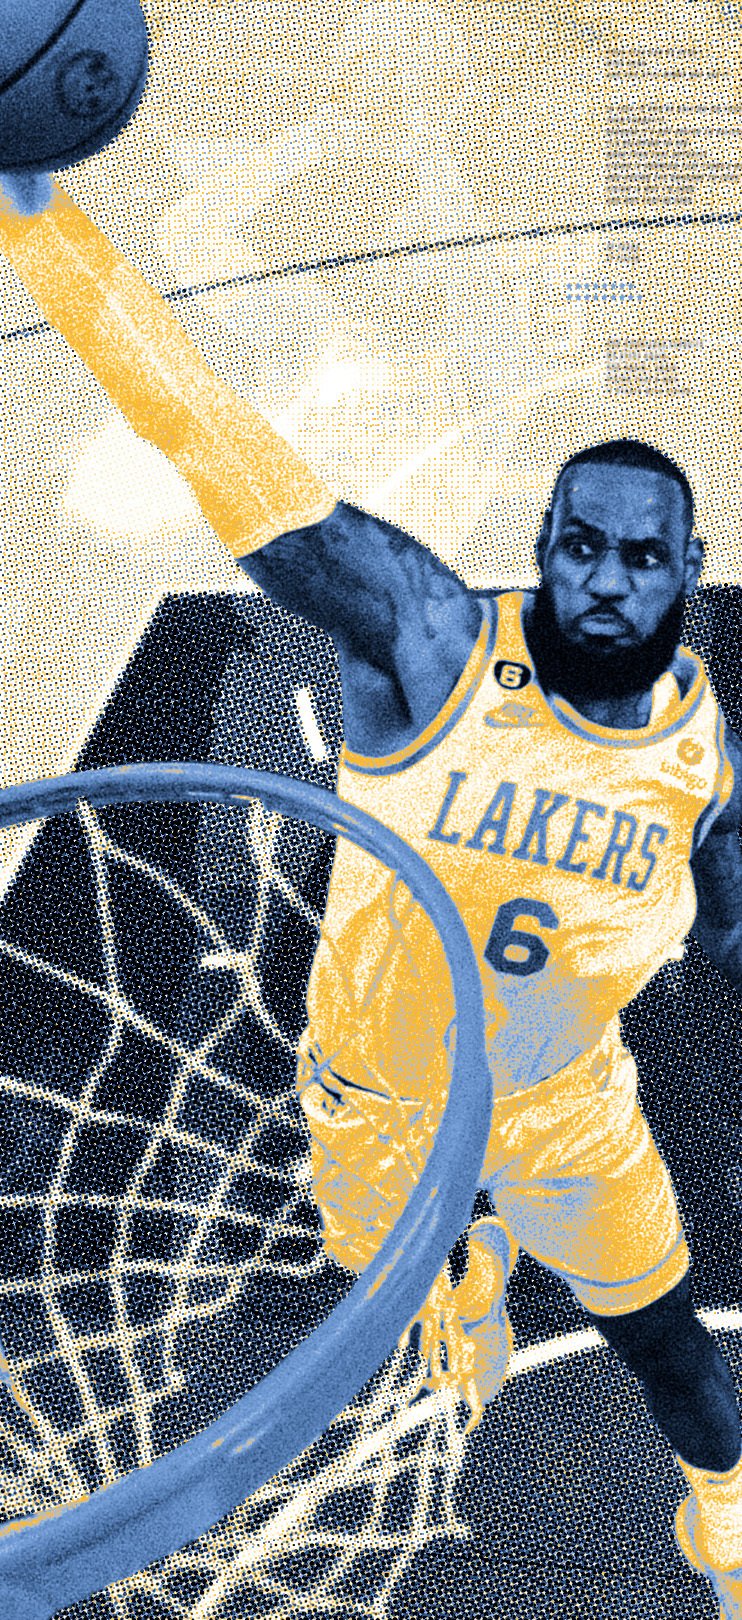 400+] Lakers Wallpapers